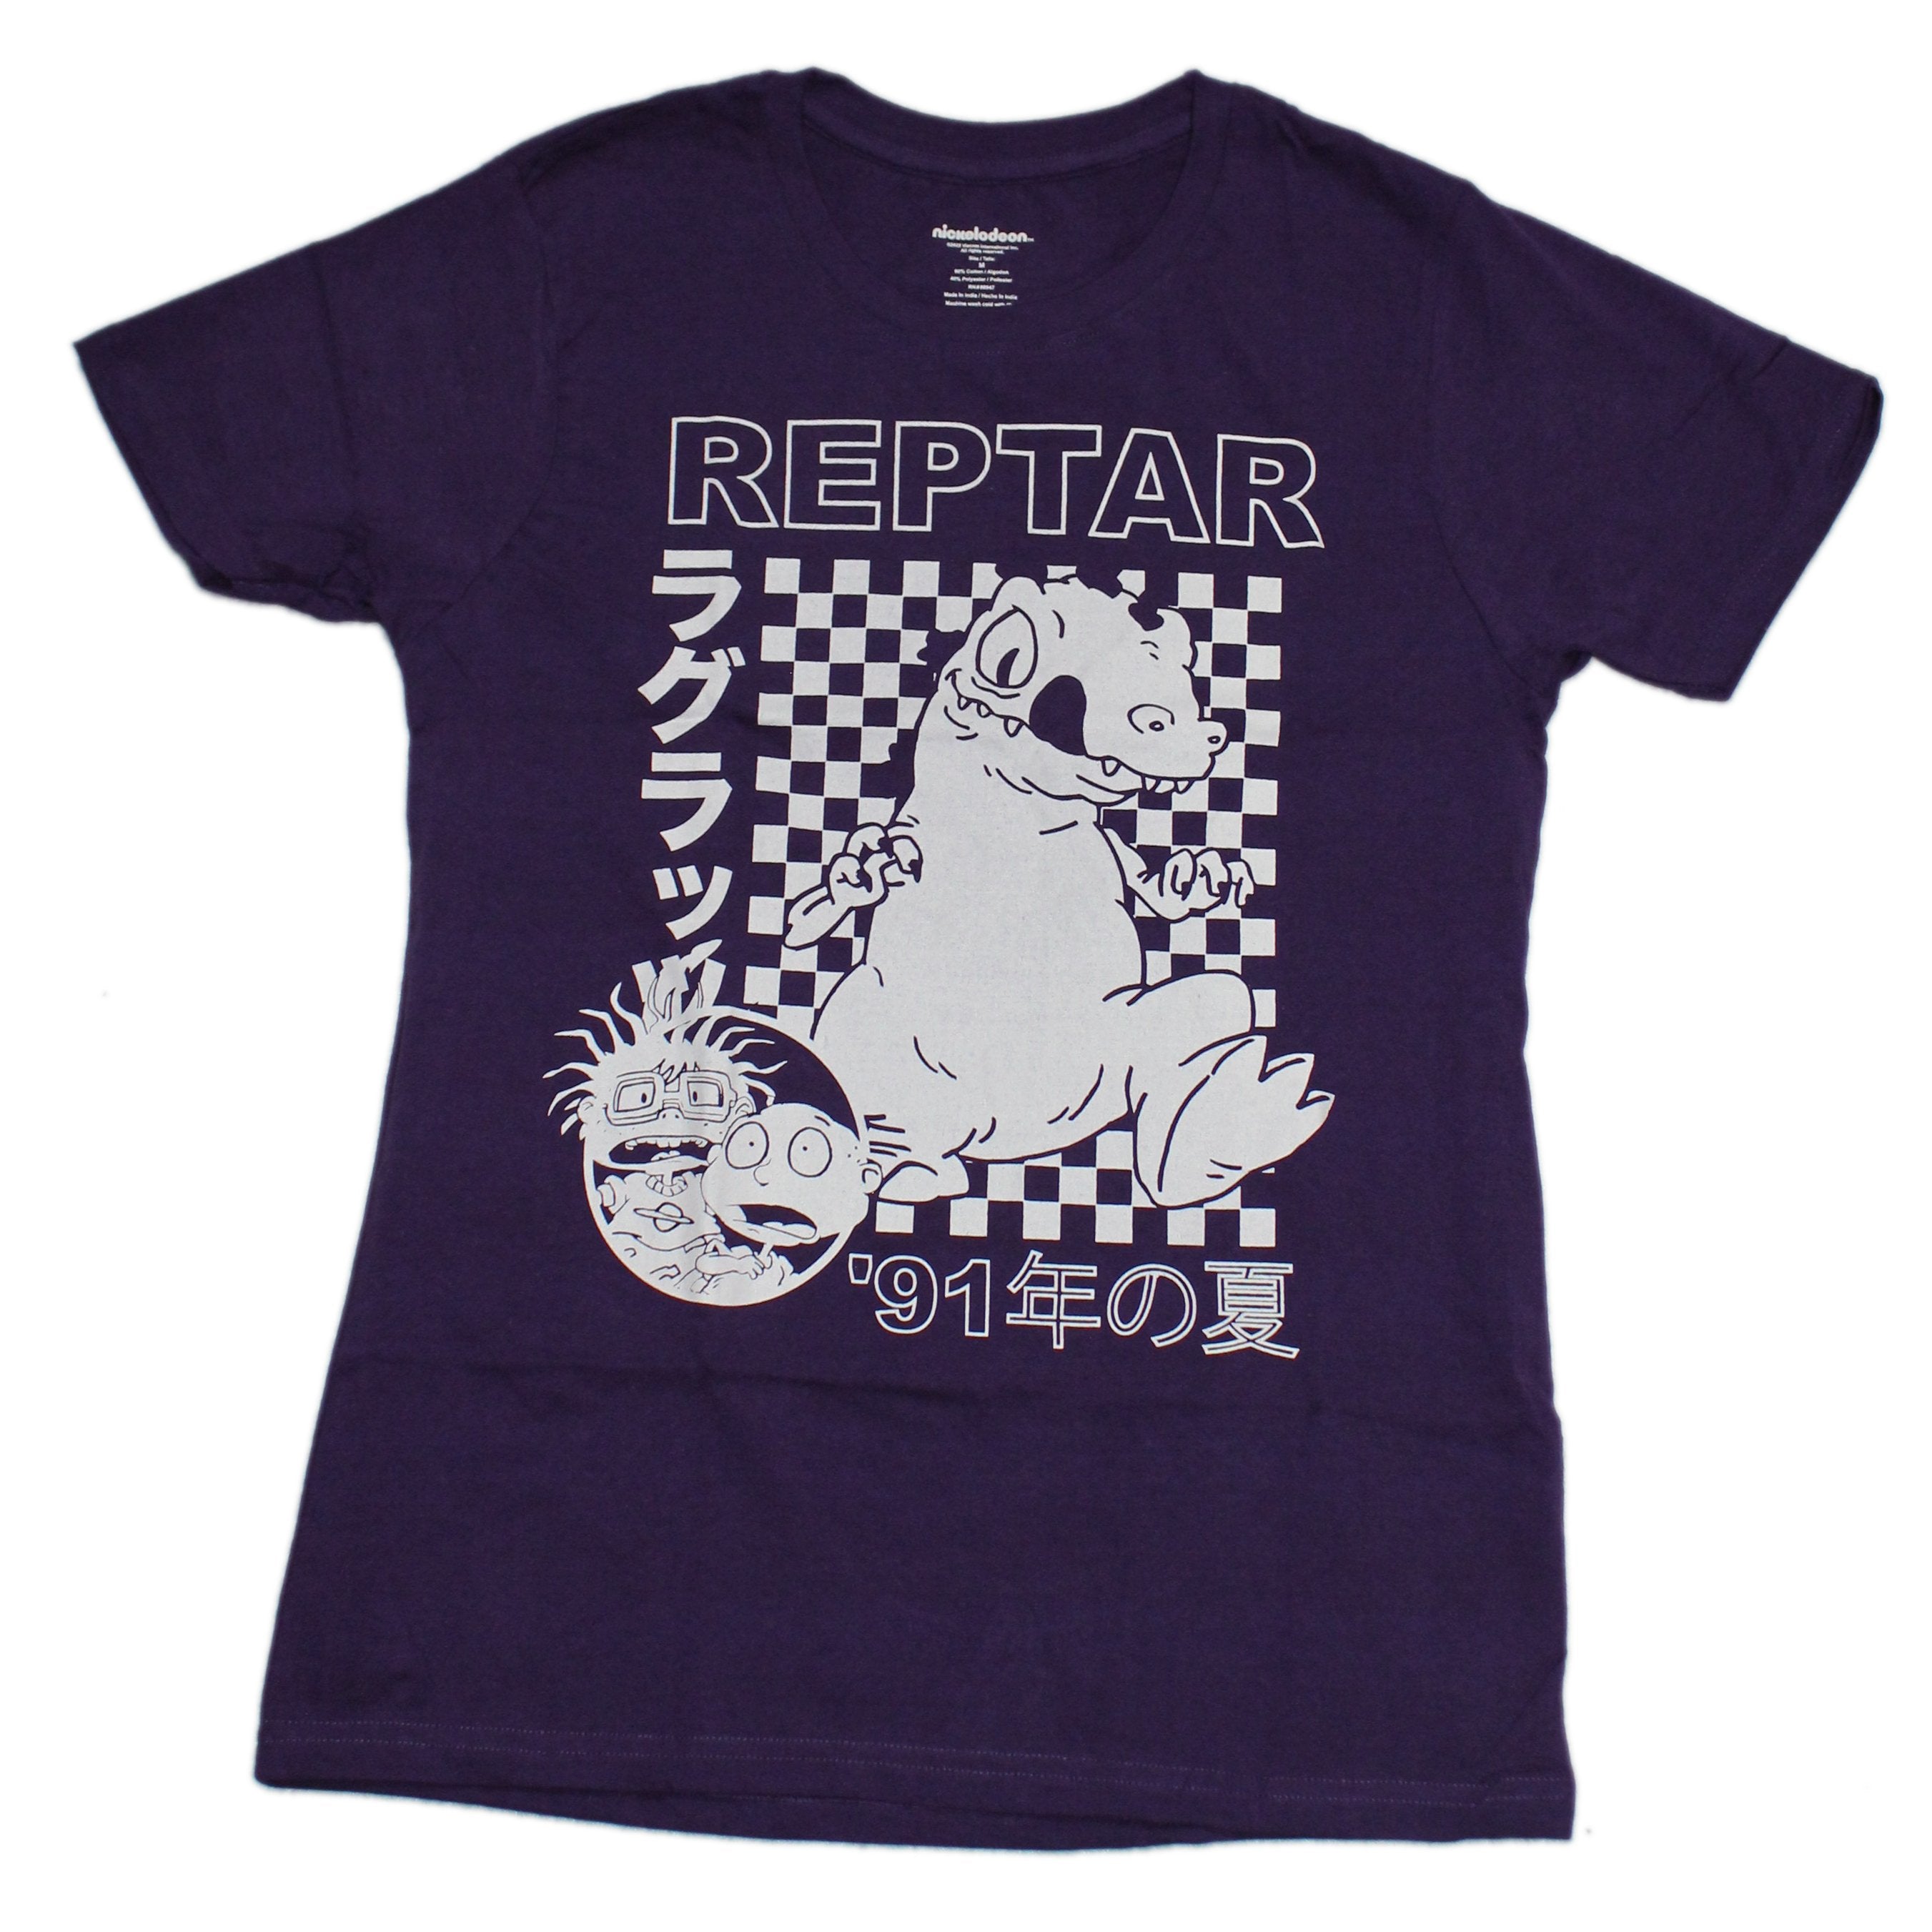 Rugrats Mens T-Shirt -Giant White Reptar Checkered background